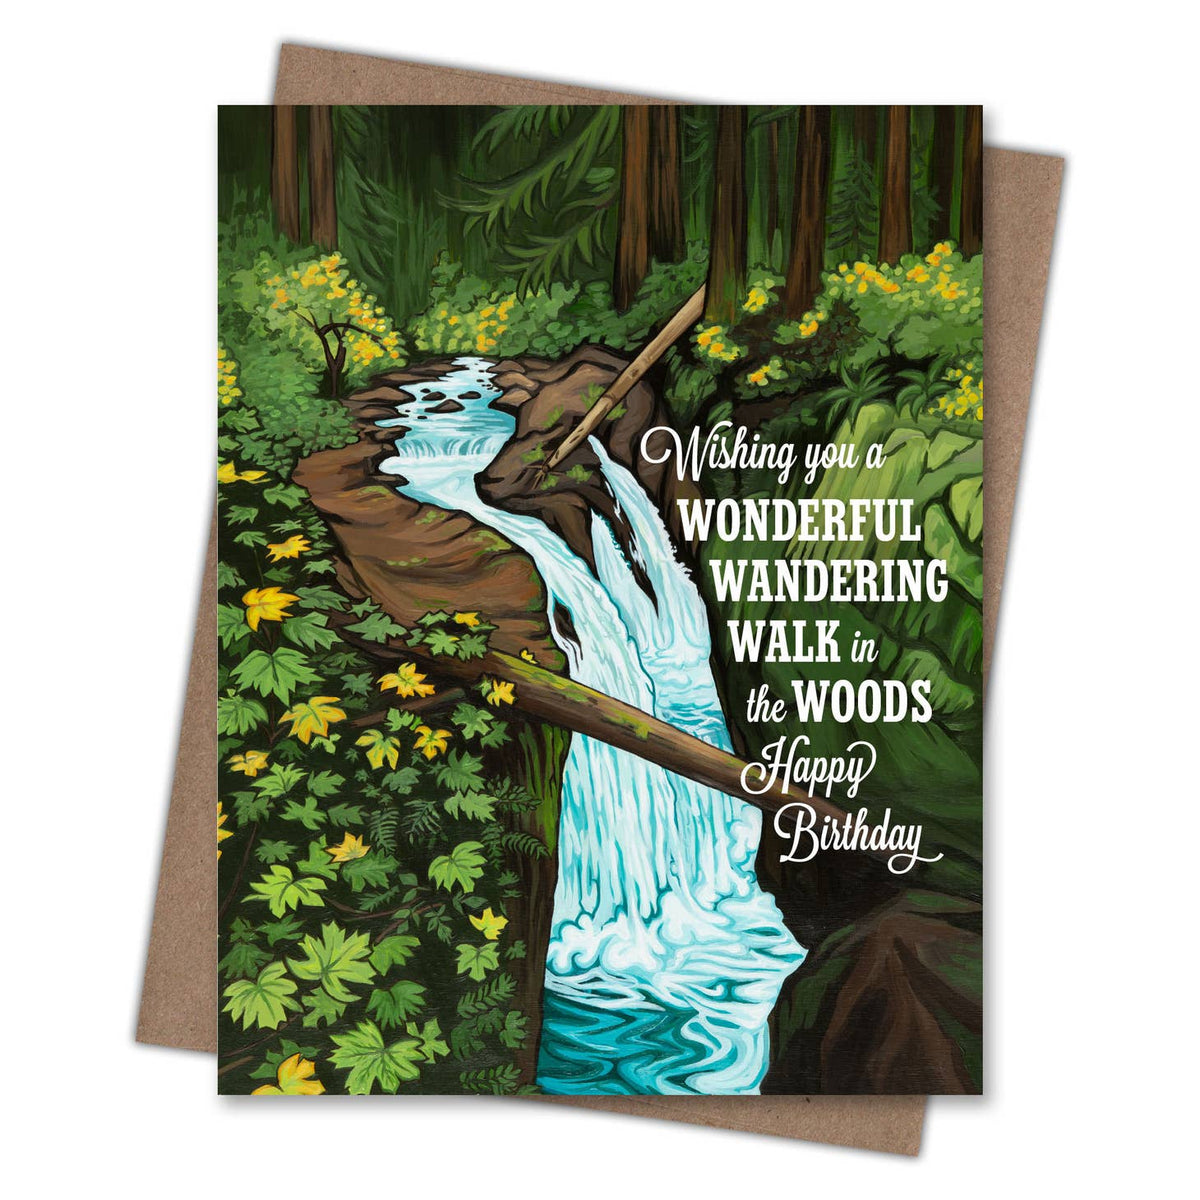 BIrthday Card with large trees and waterfall that reads "wishing you a wonderful, wandering walk in the woods. Happy Birthday"